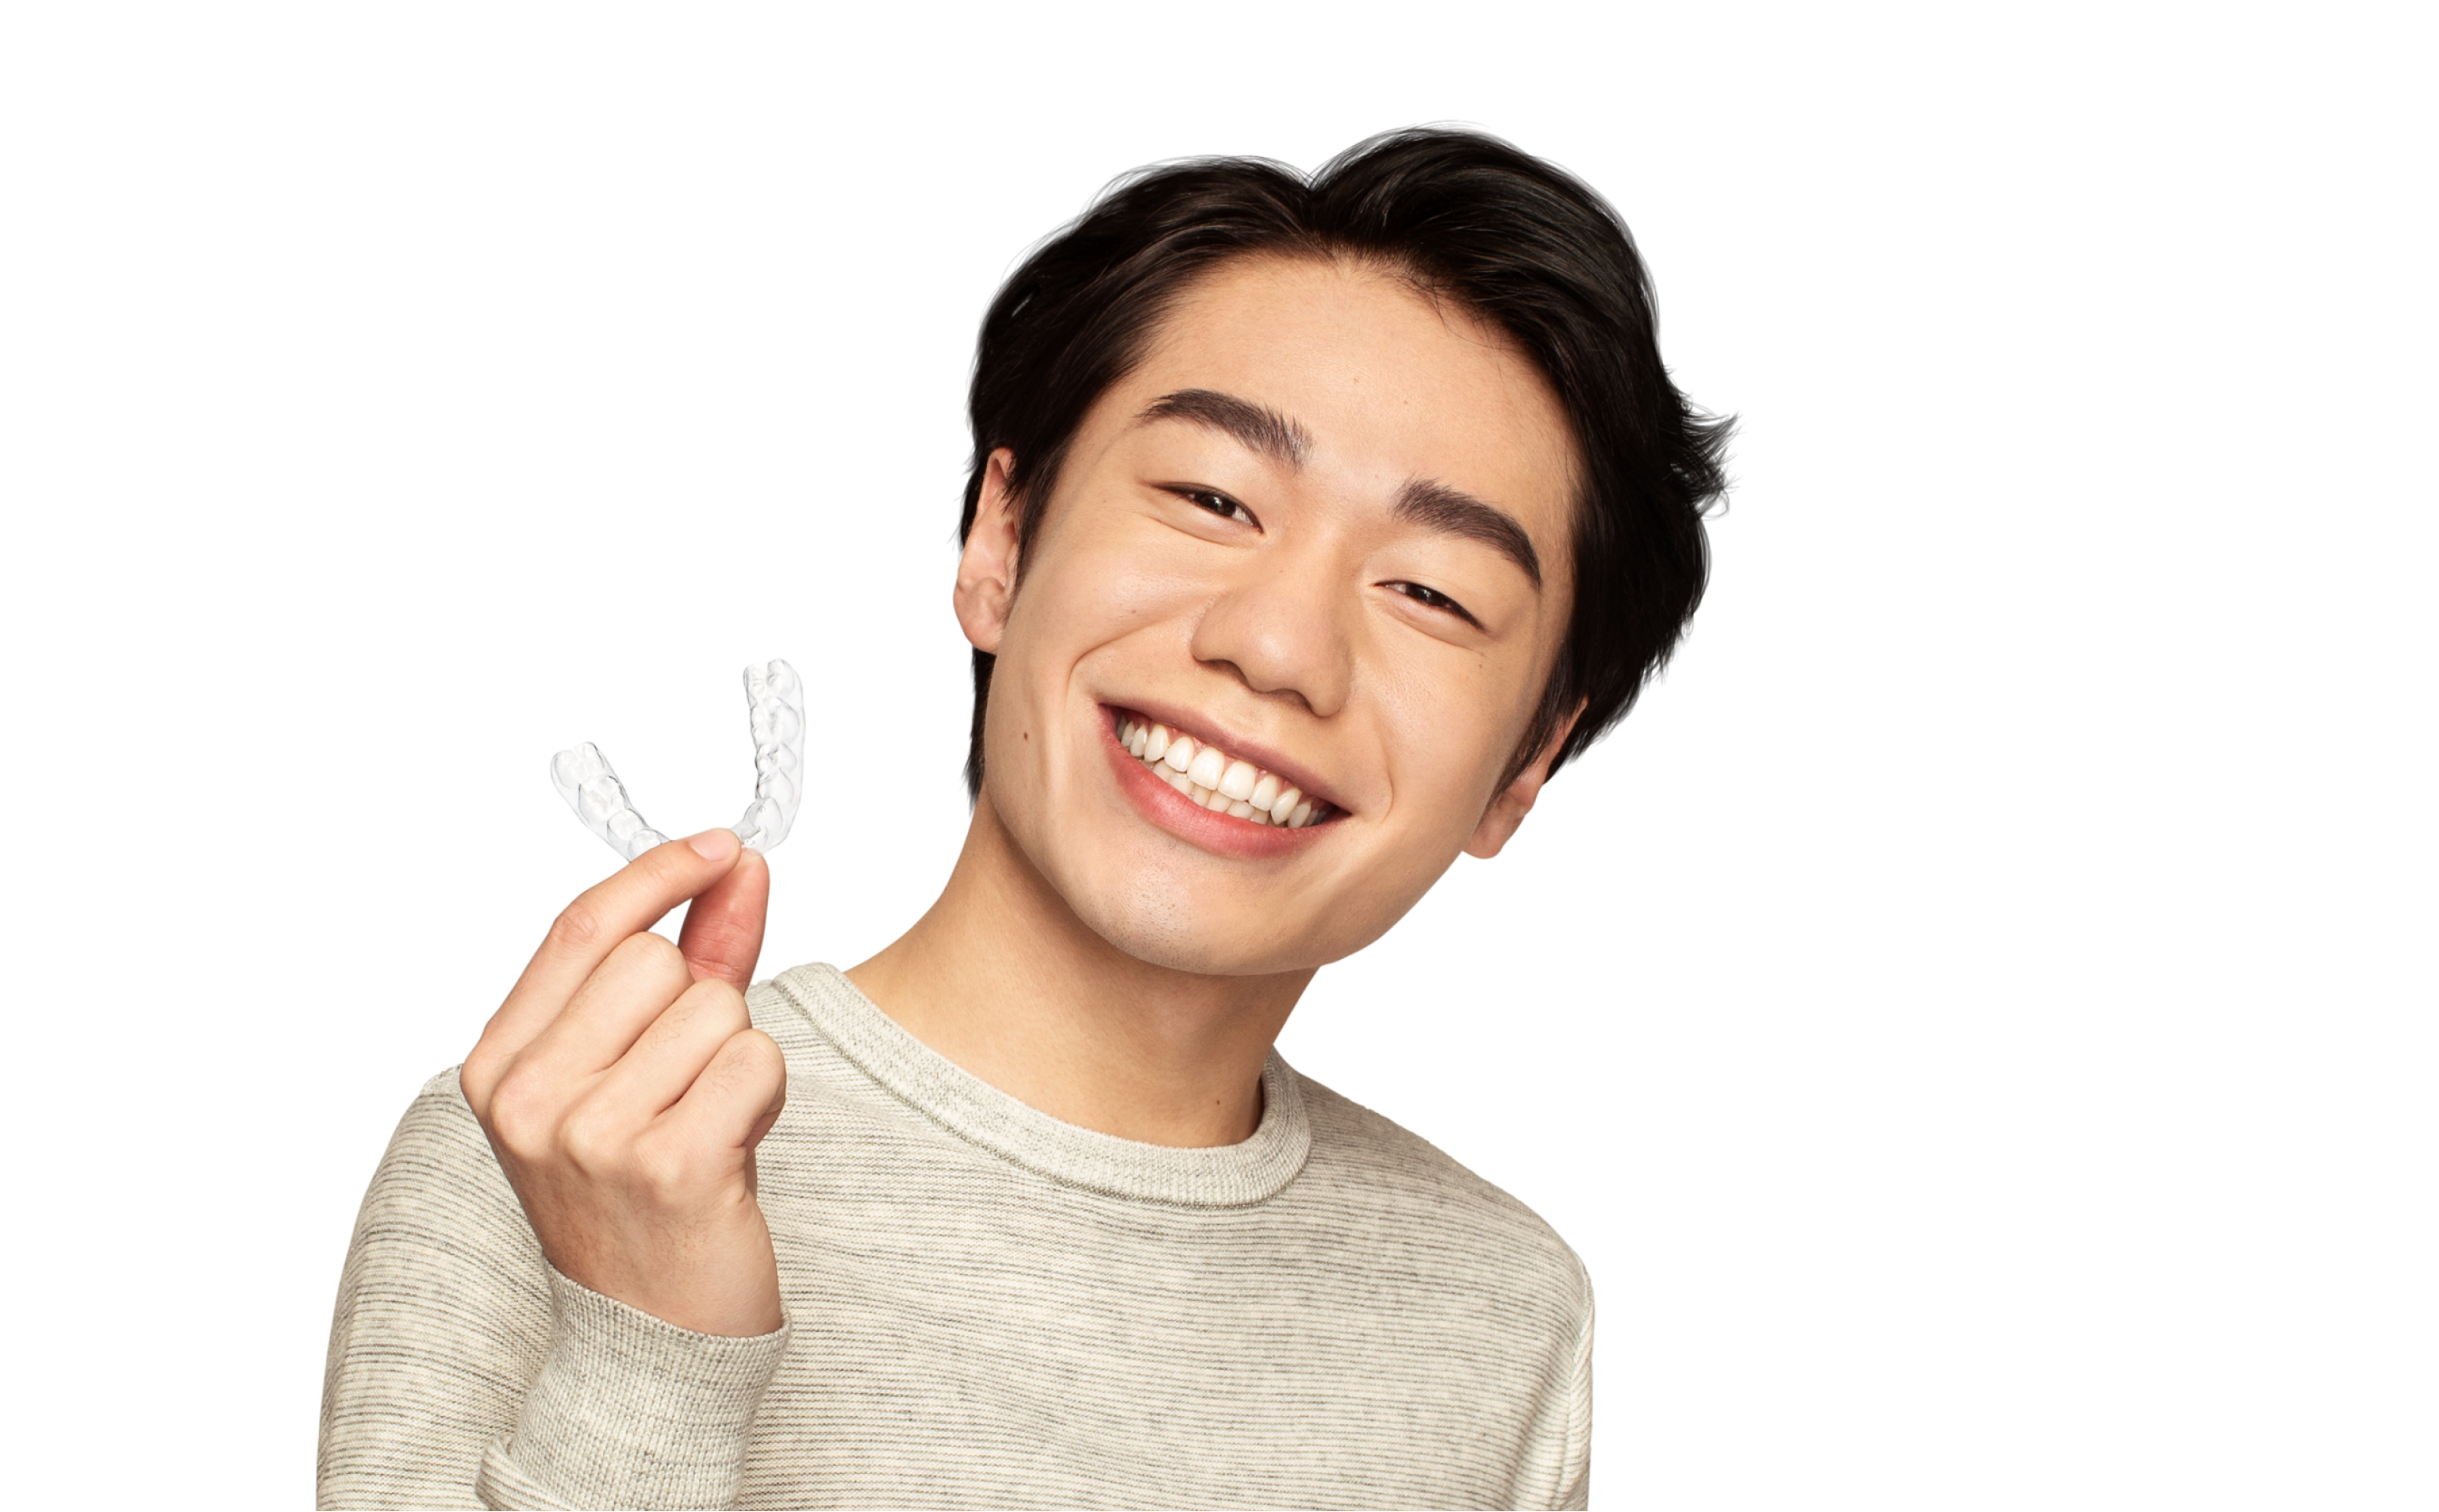 Asian man with black hair and a beige sweater smiling and holding SmileDirectClub Aligner